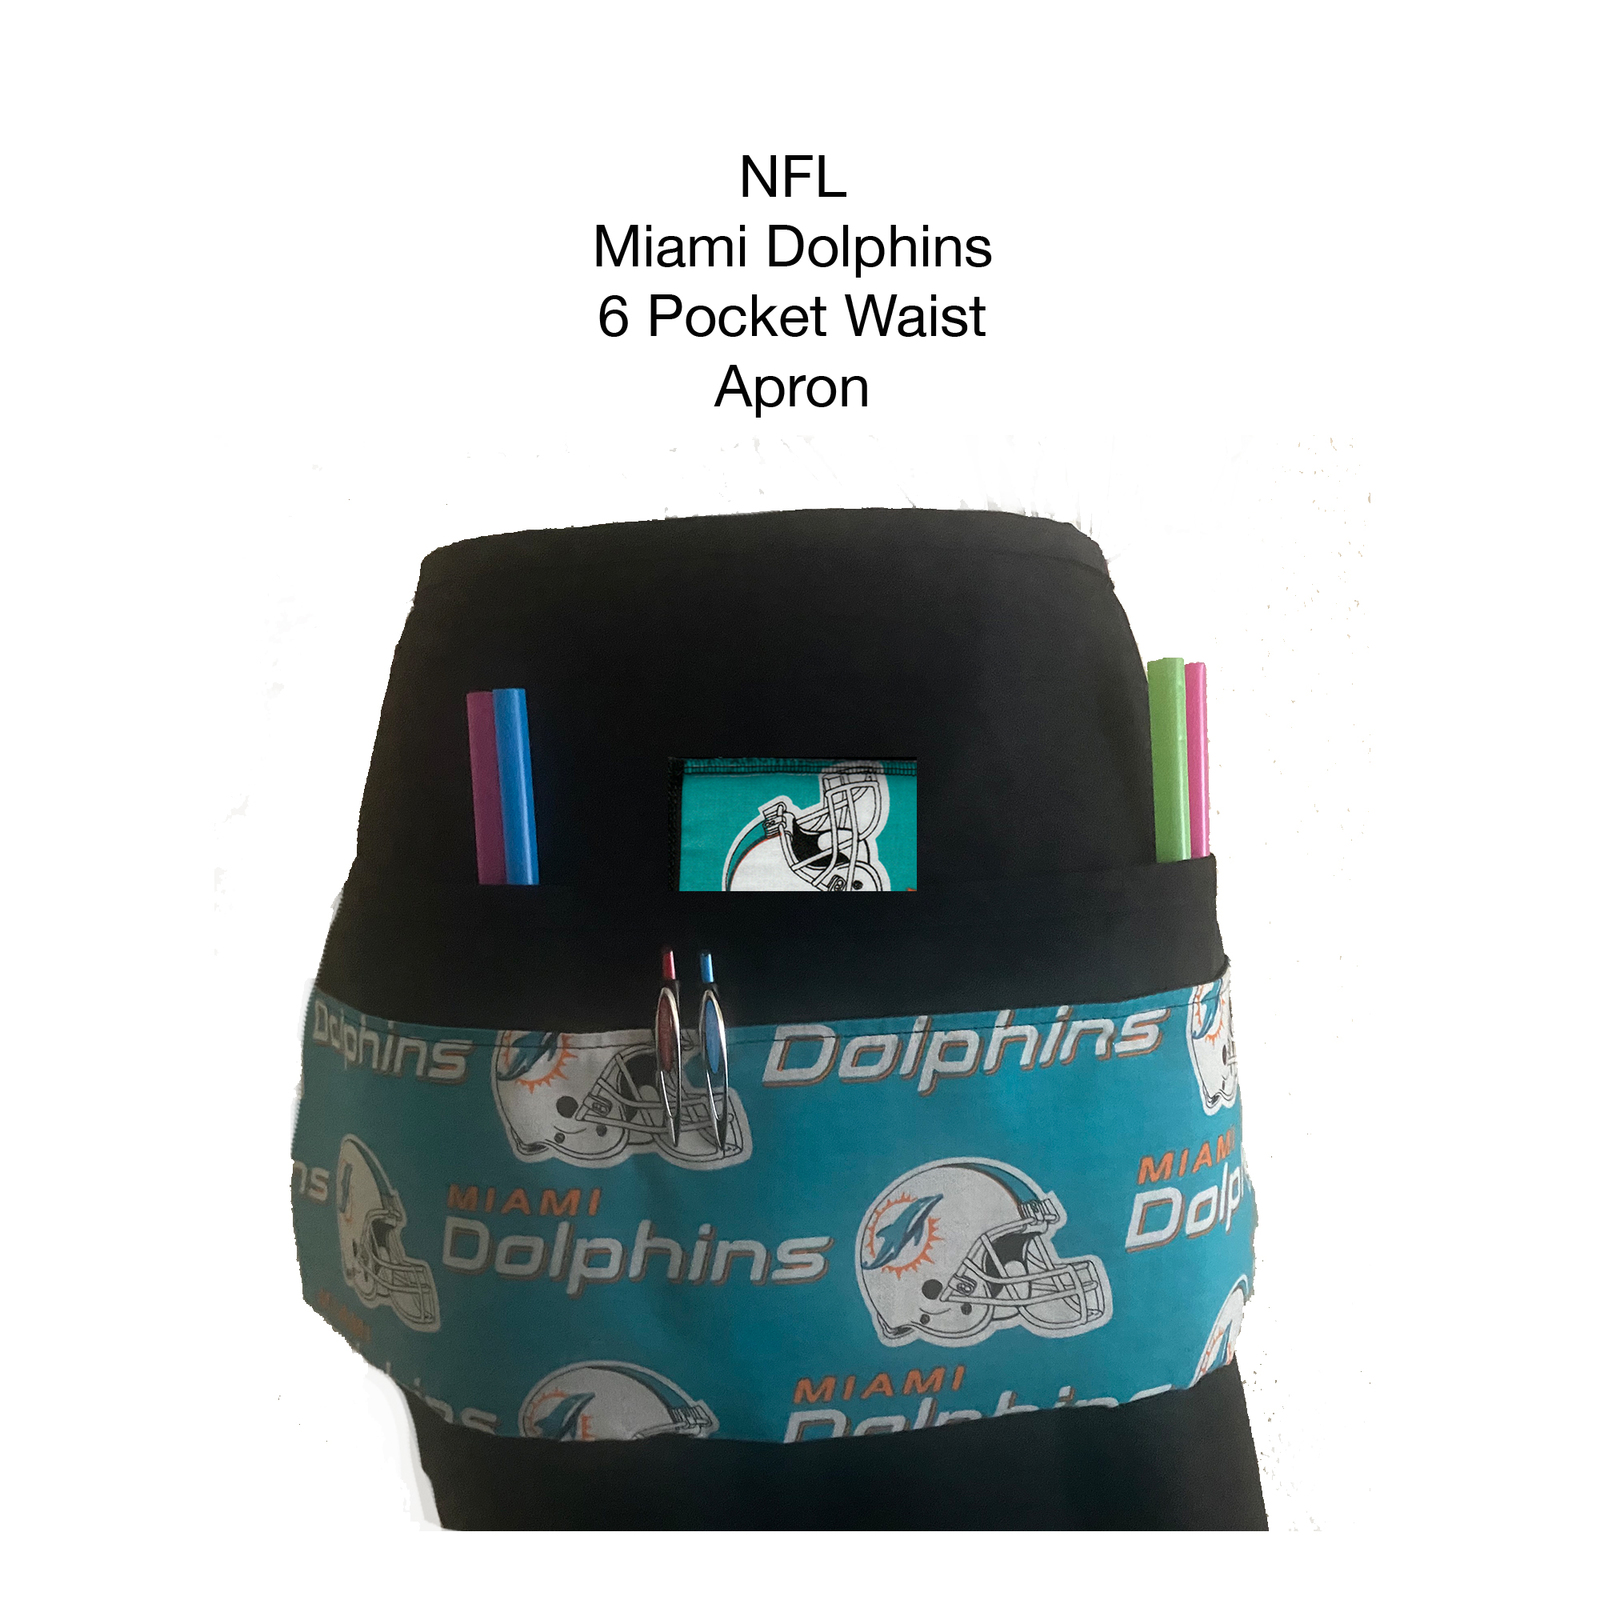 Primary image for 6 Pocket Waist Apron / NFL Miami Dolphins